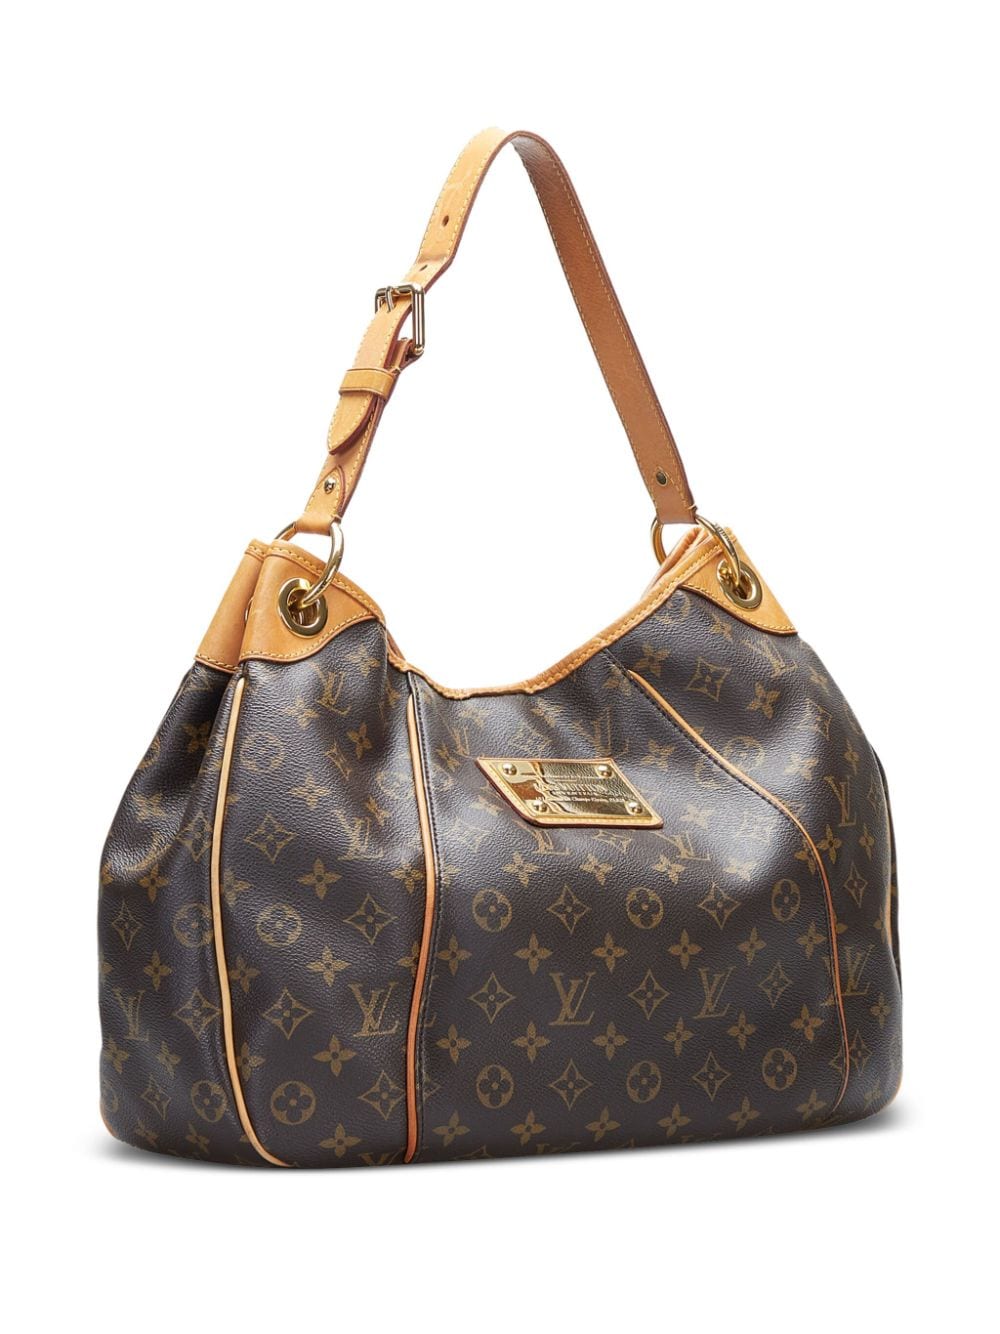 Pre-owned Louis Vuitton 2009 Galliera Pm Tote Bag In Brown